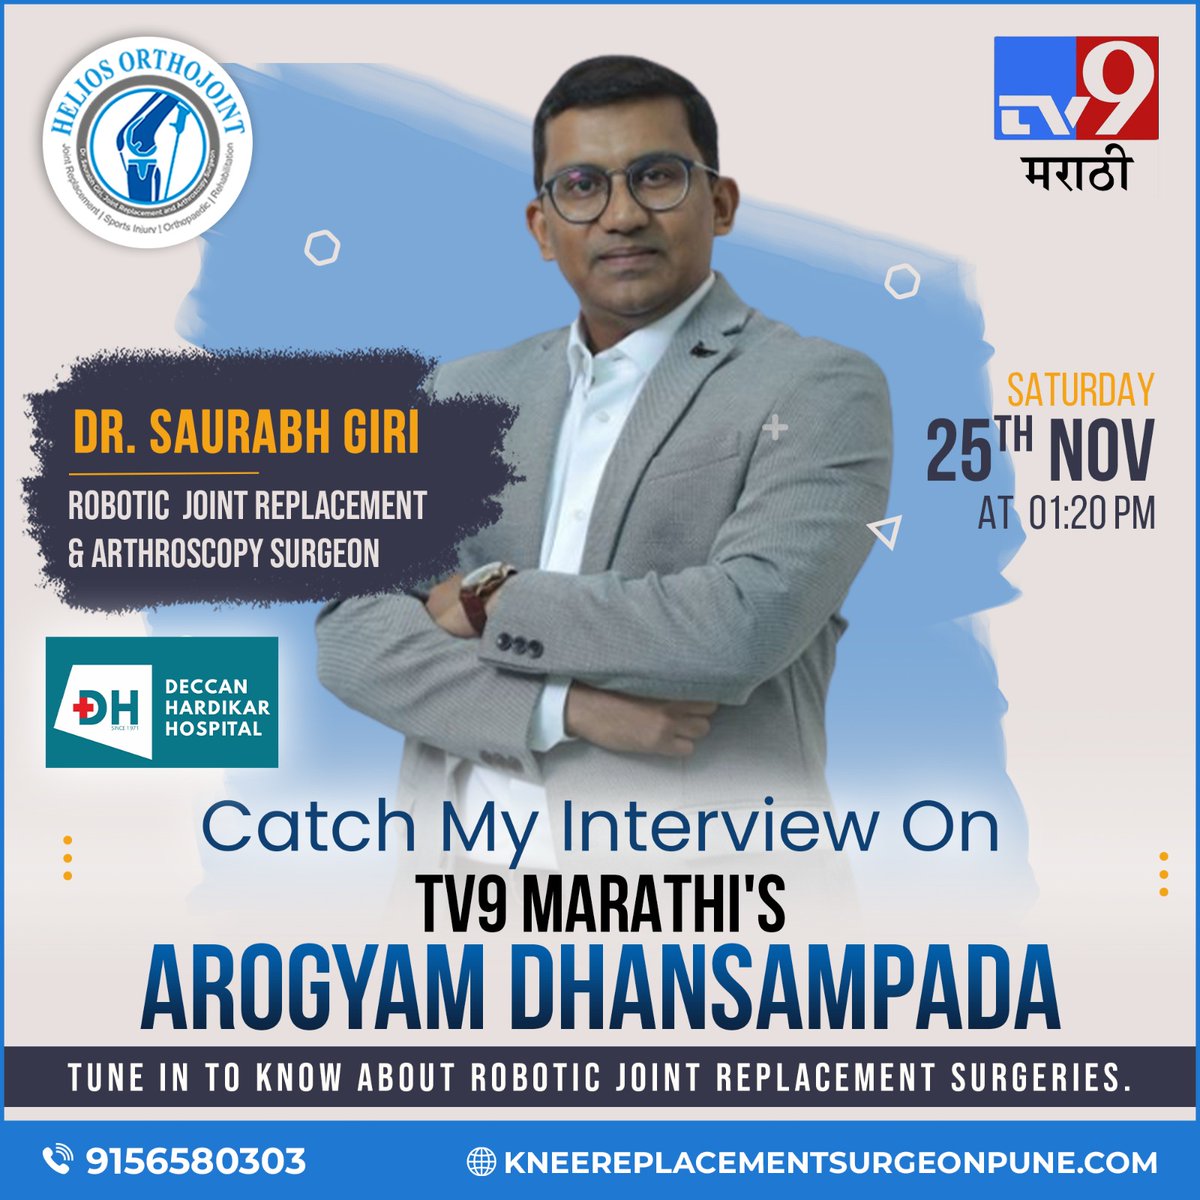 Mark your calendars and listen to Dr. Saurabh Giri's interview on #TV9Marathi's #ArogyamDhansampada on November 25 at 1:20 pm, discovering the cutting-edge advancements in #roboticjointreplacement. Tune in and explore a new era in #jointcare. #DeccanHardikar #Pune